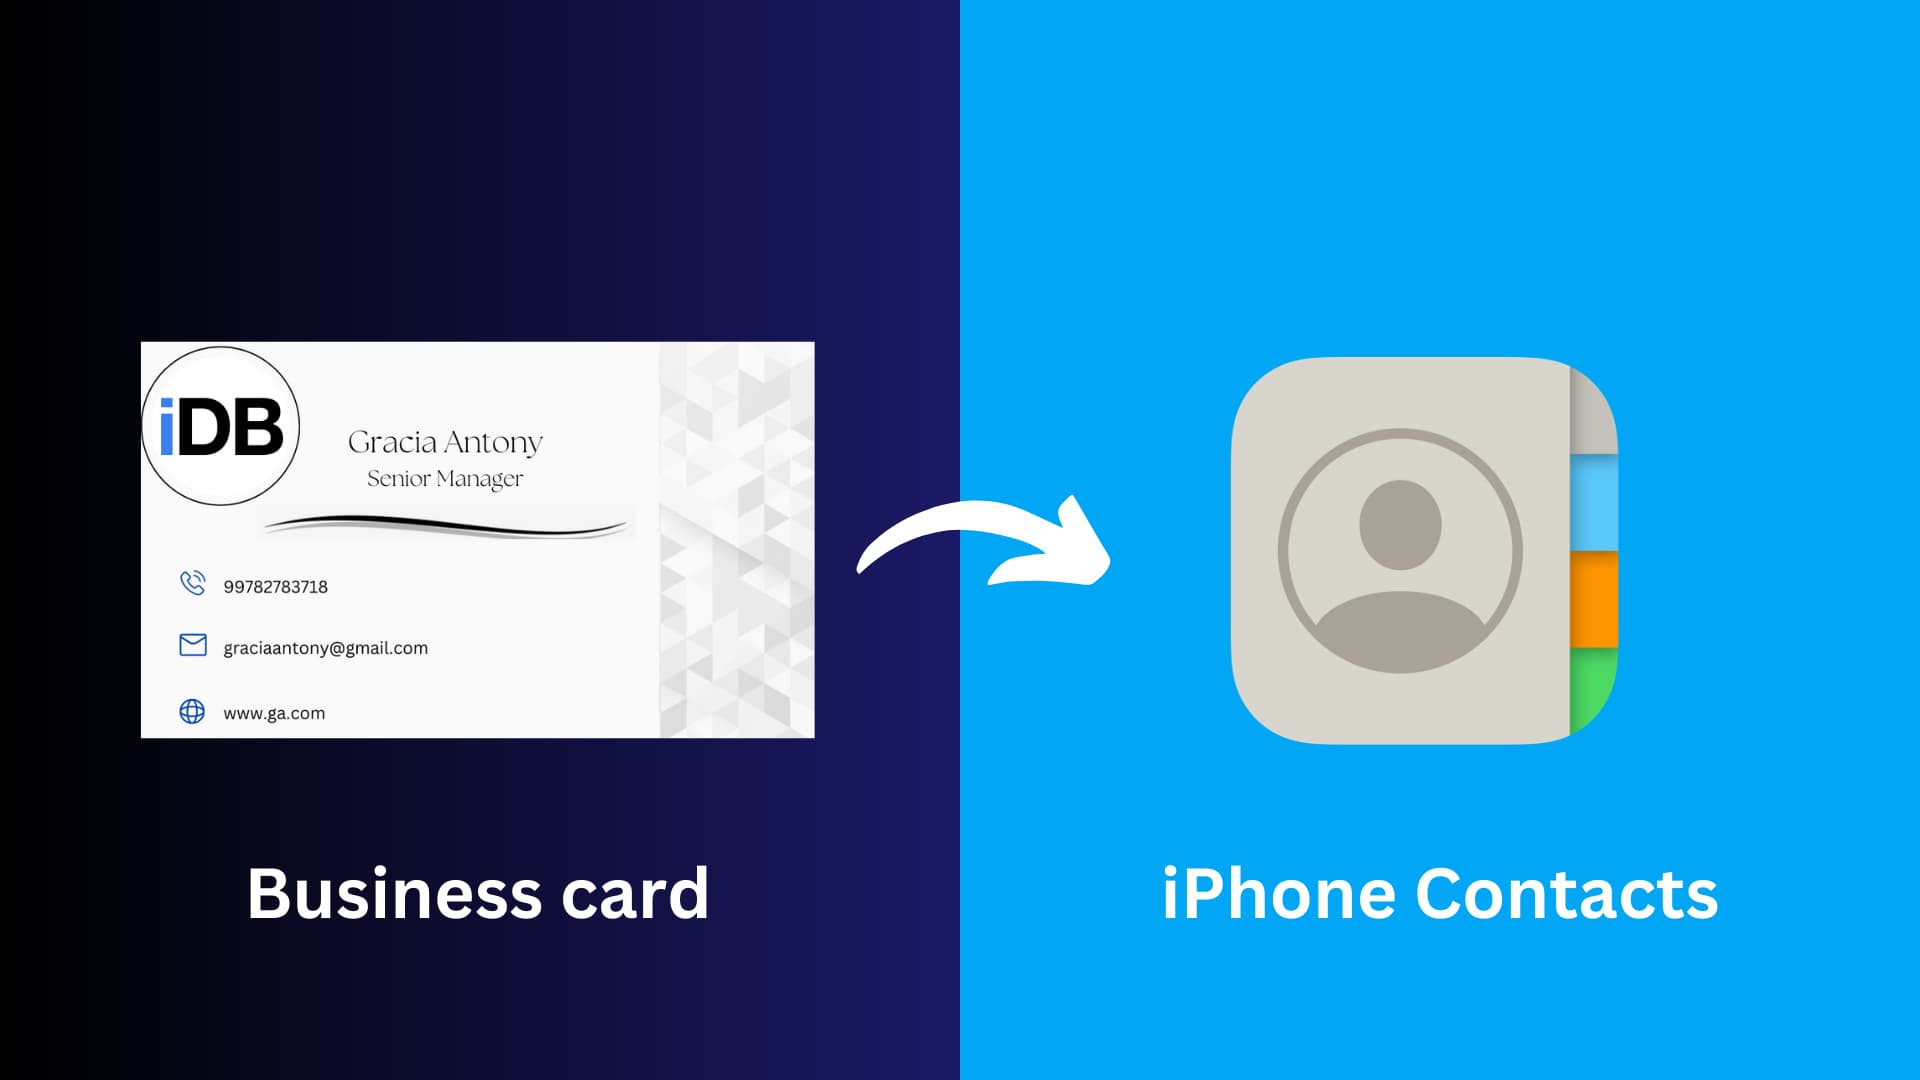 How to scan a business card and save its info to the Contacts app on iPhone